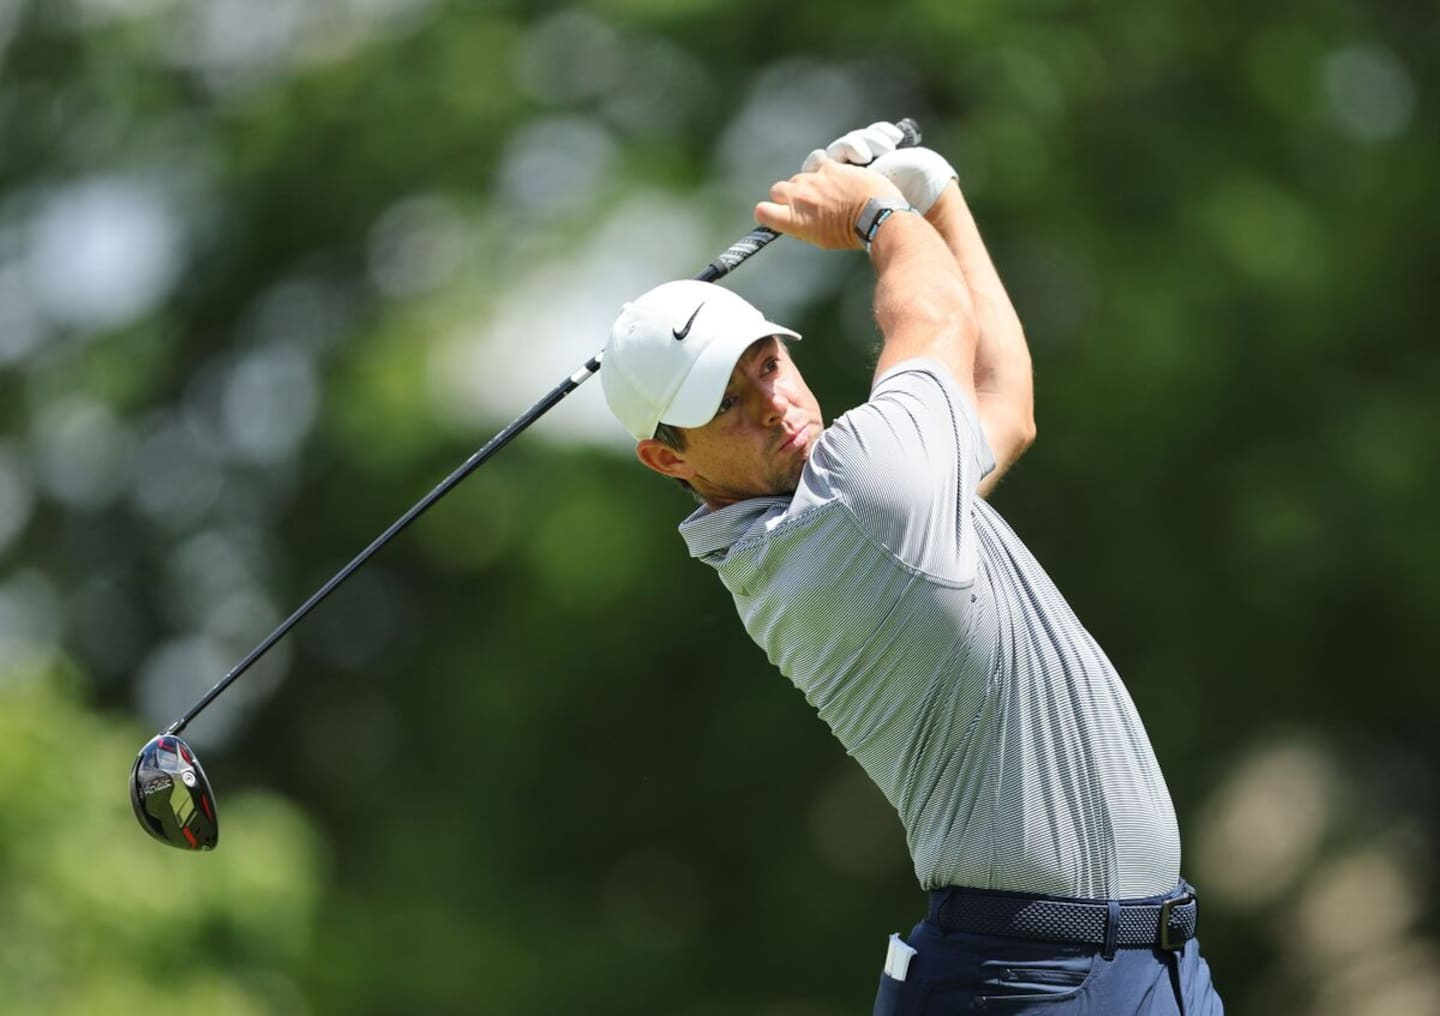 From the great Rory McIlroy to the Travelers Championship